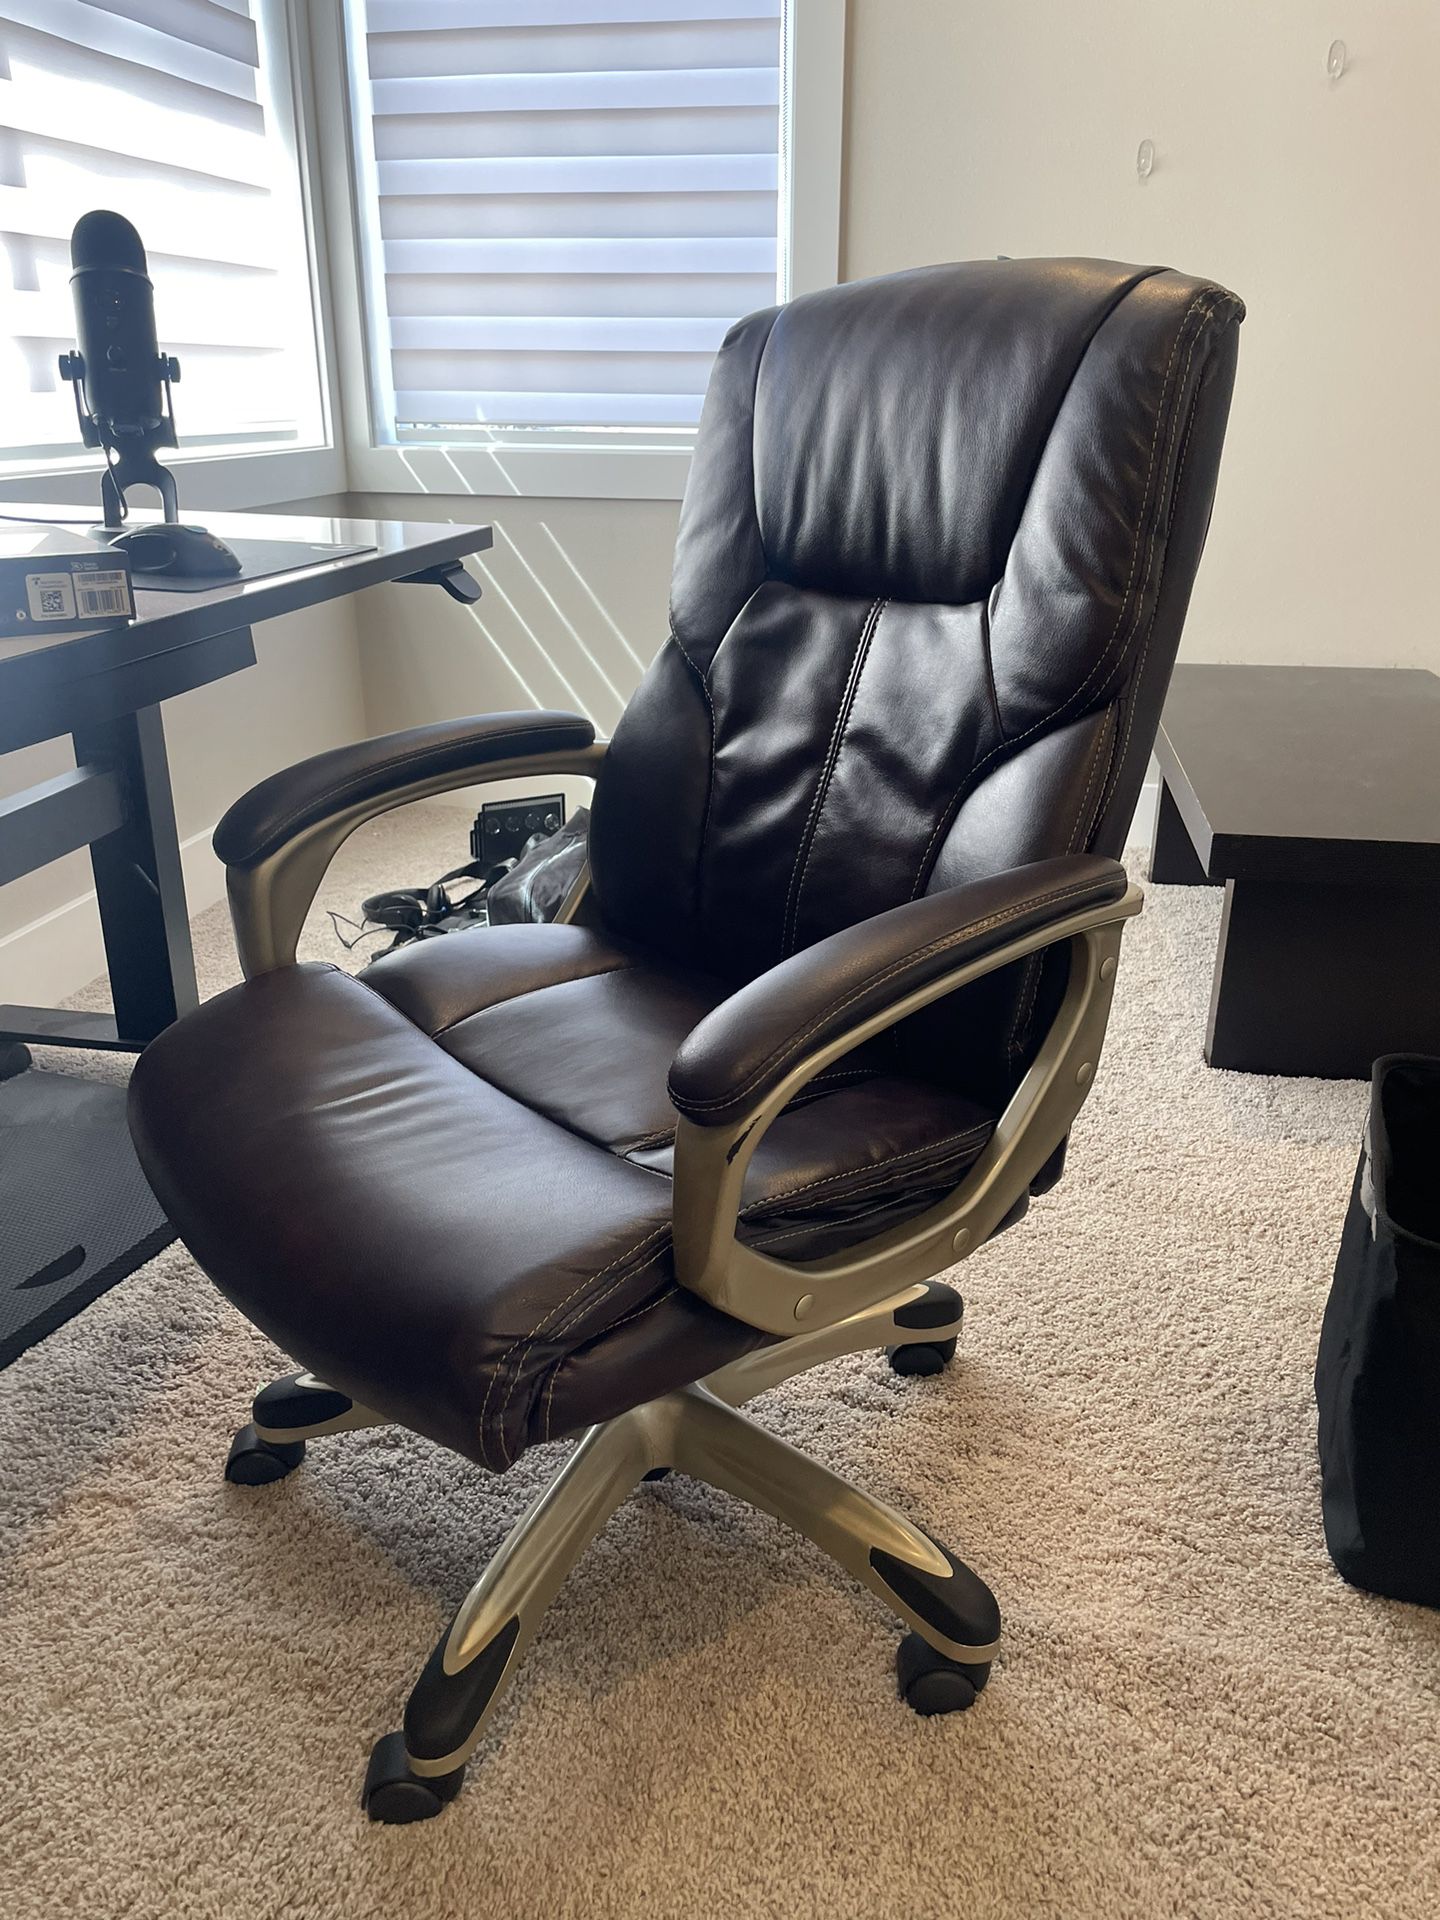 Office chair $20